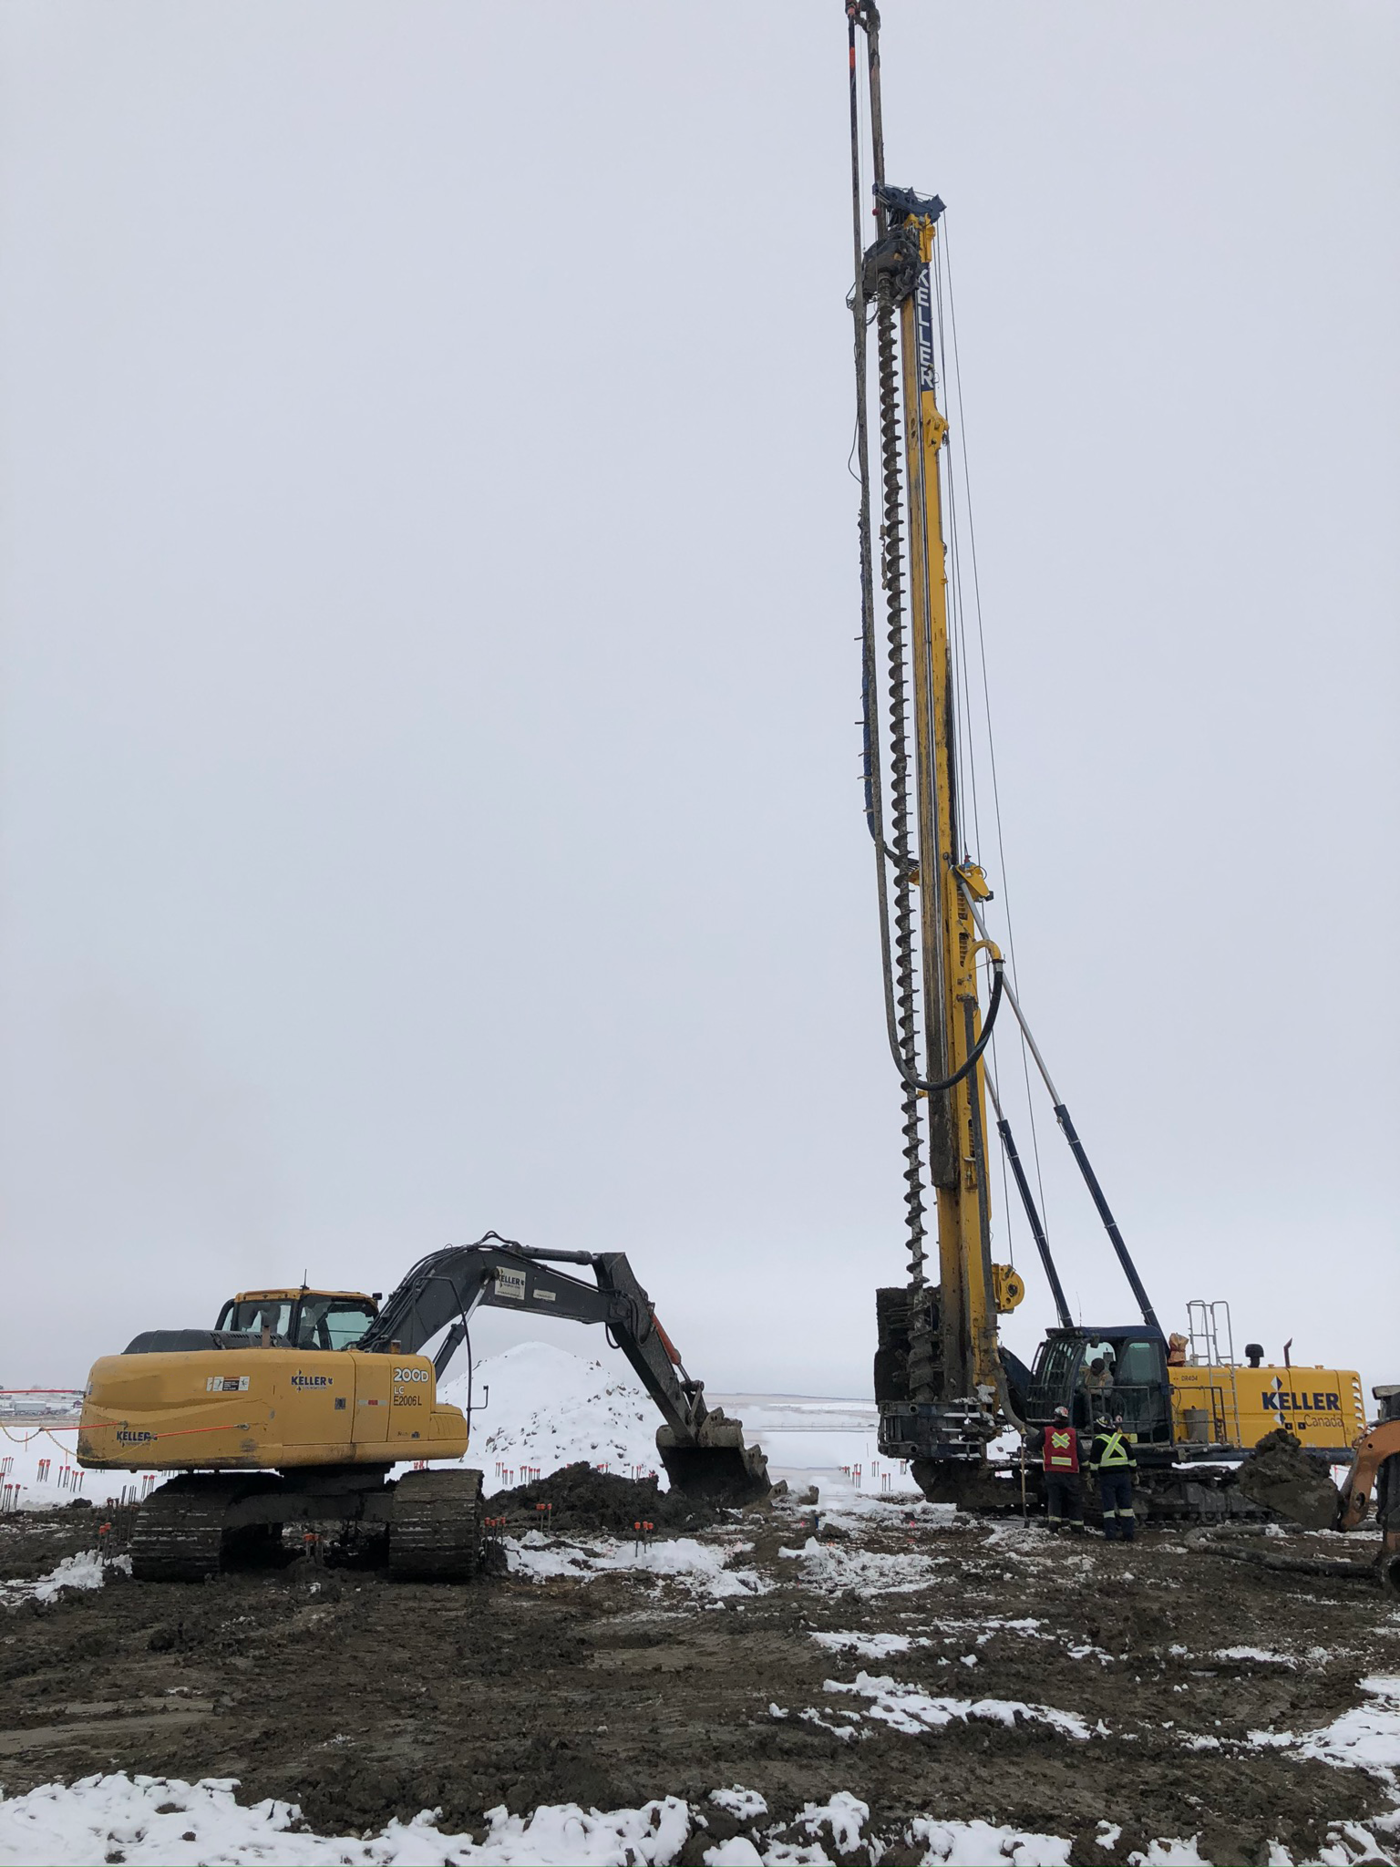 Installing CFA auger cast piles in harsh weather conditions